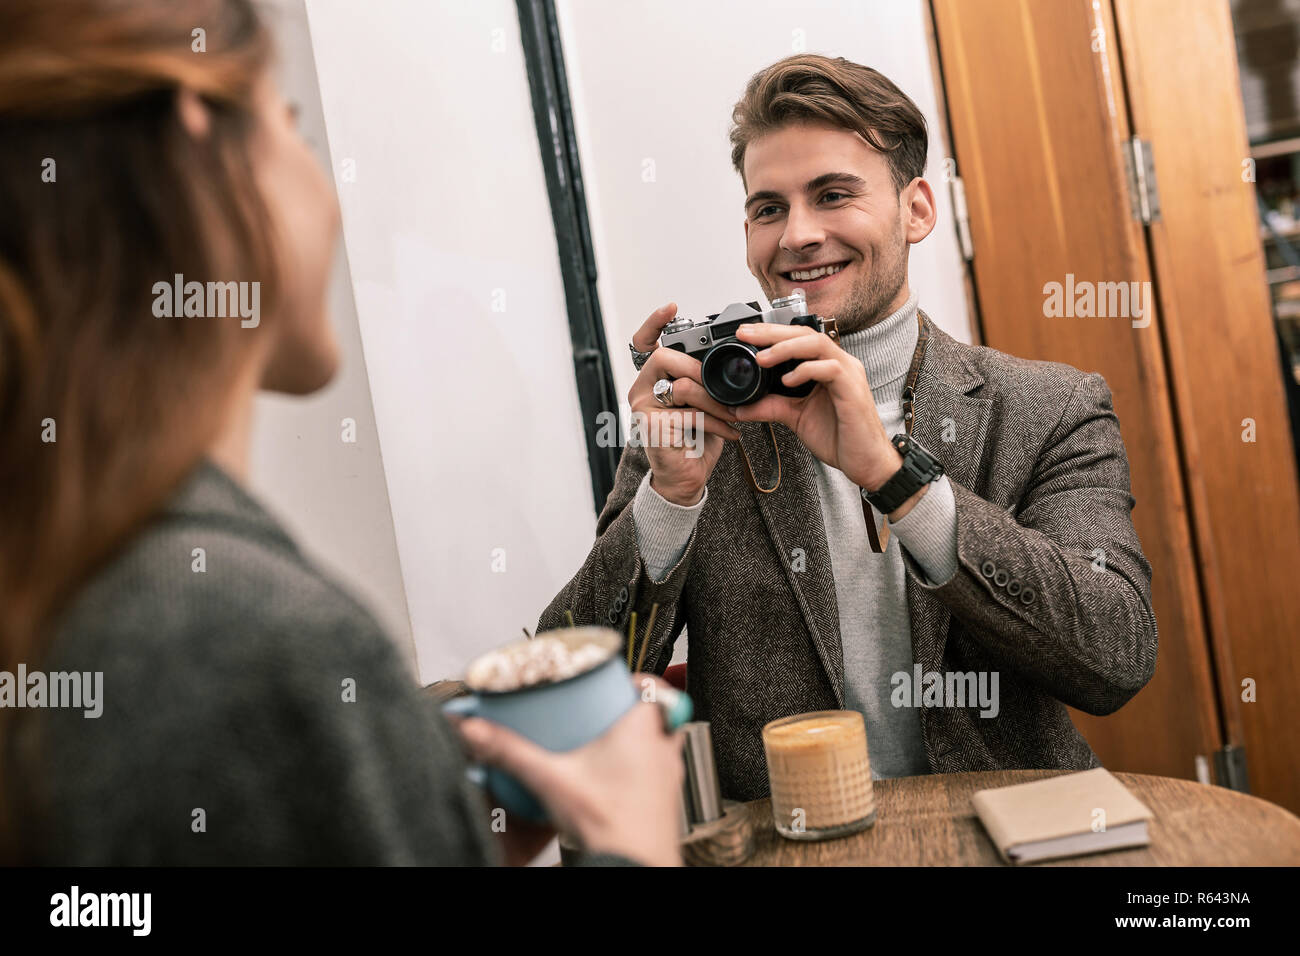 Man photographing woman while sitting in a cafe Stock Photo